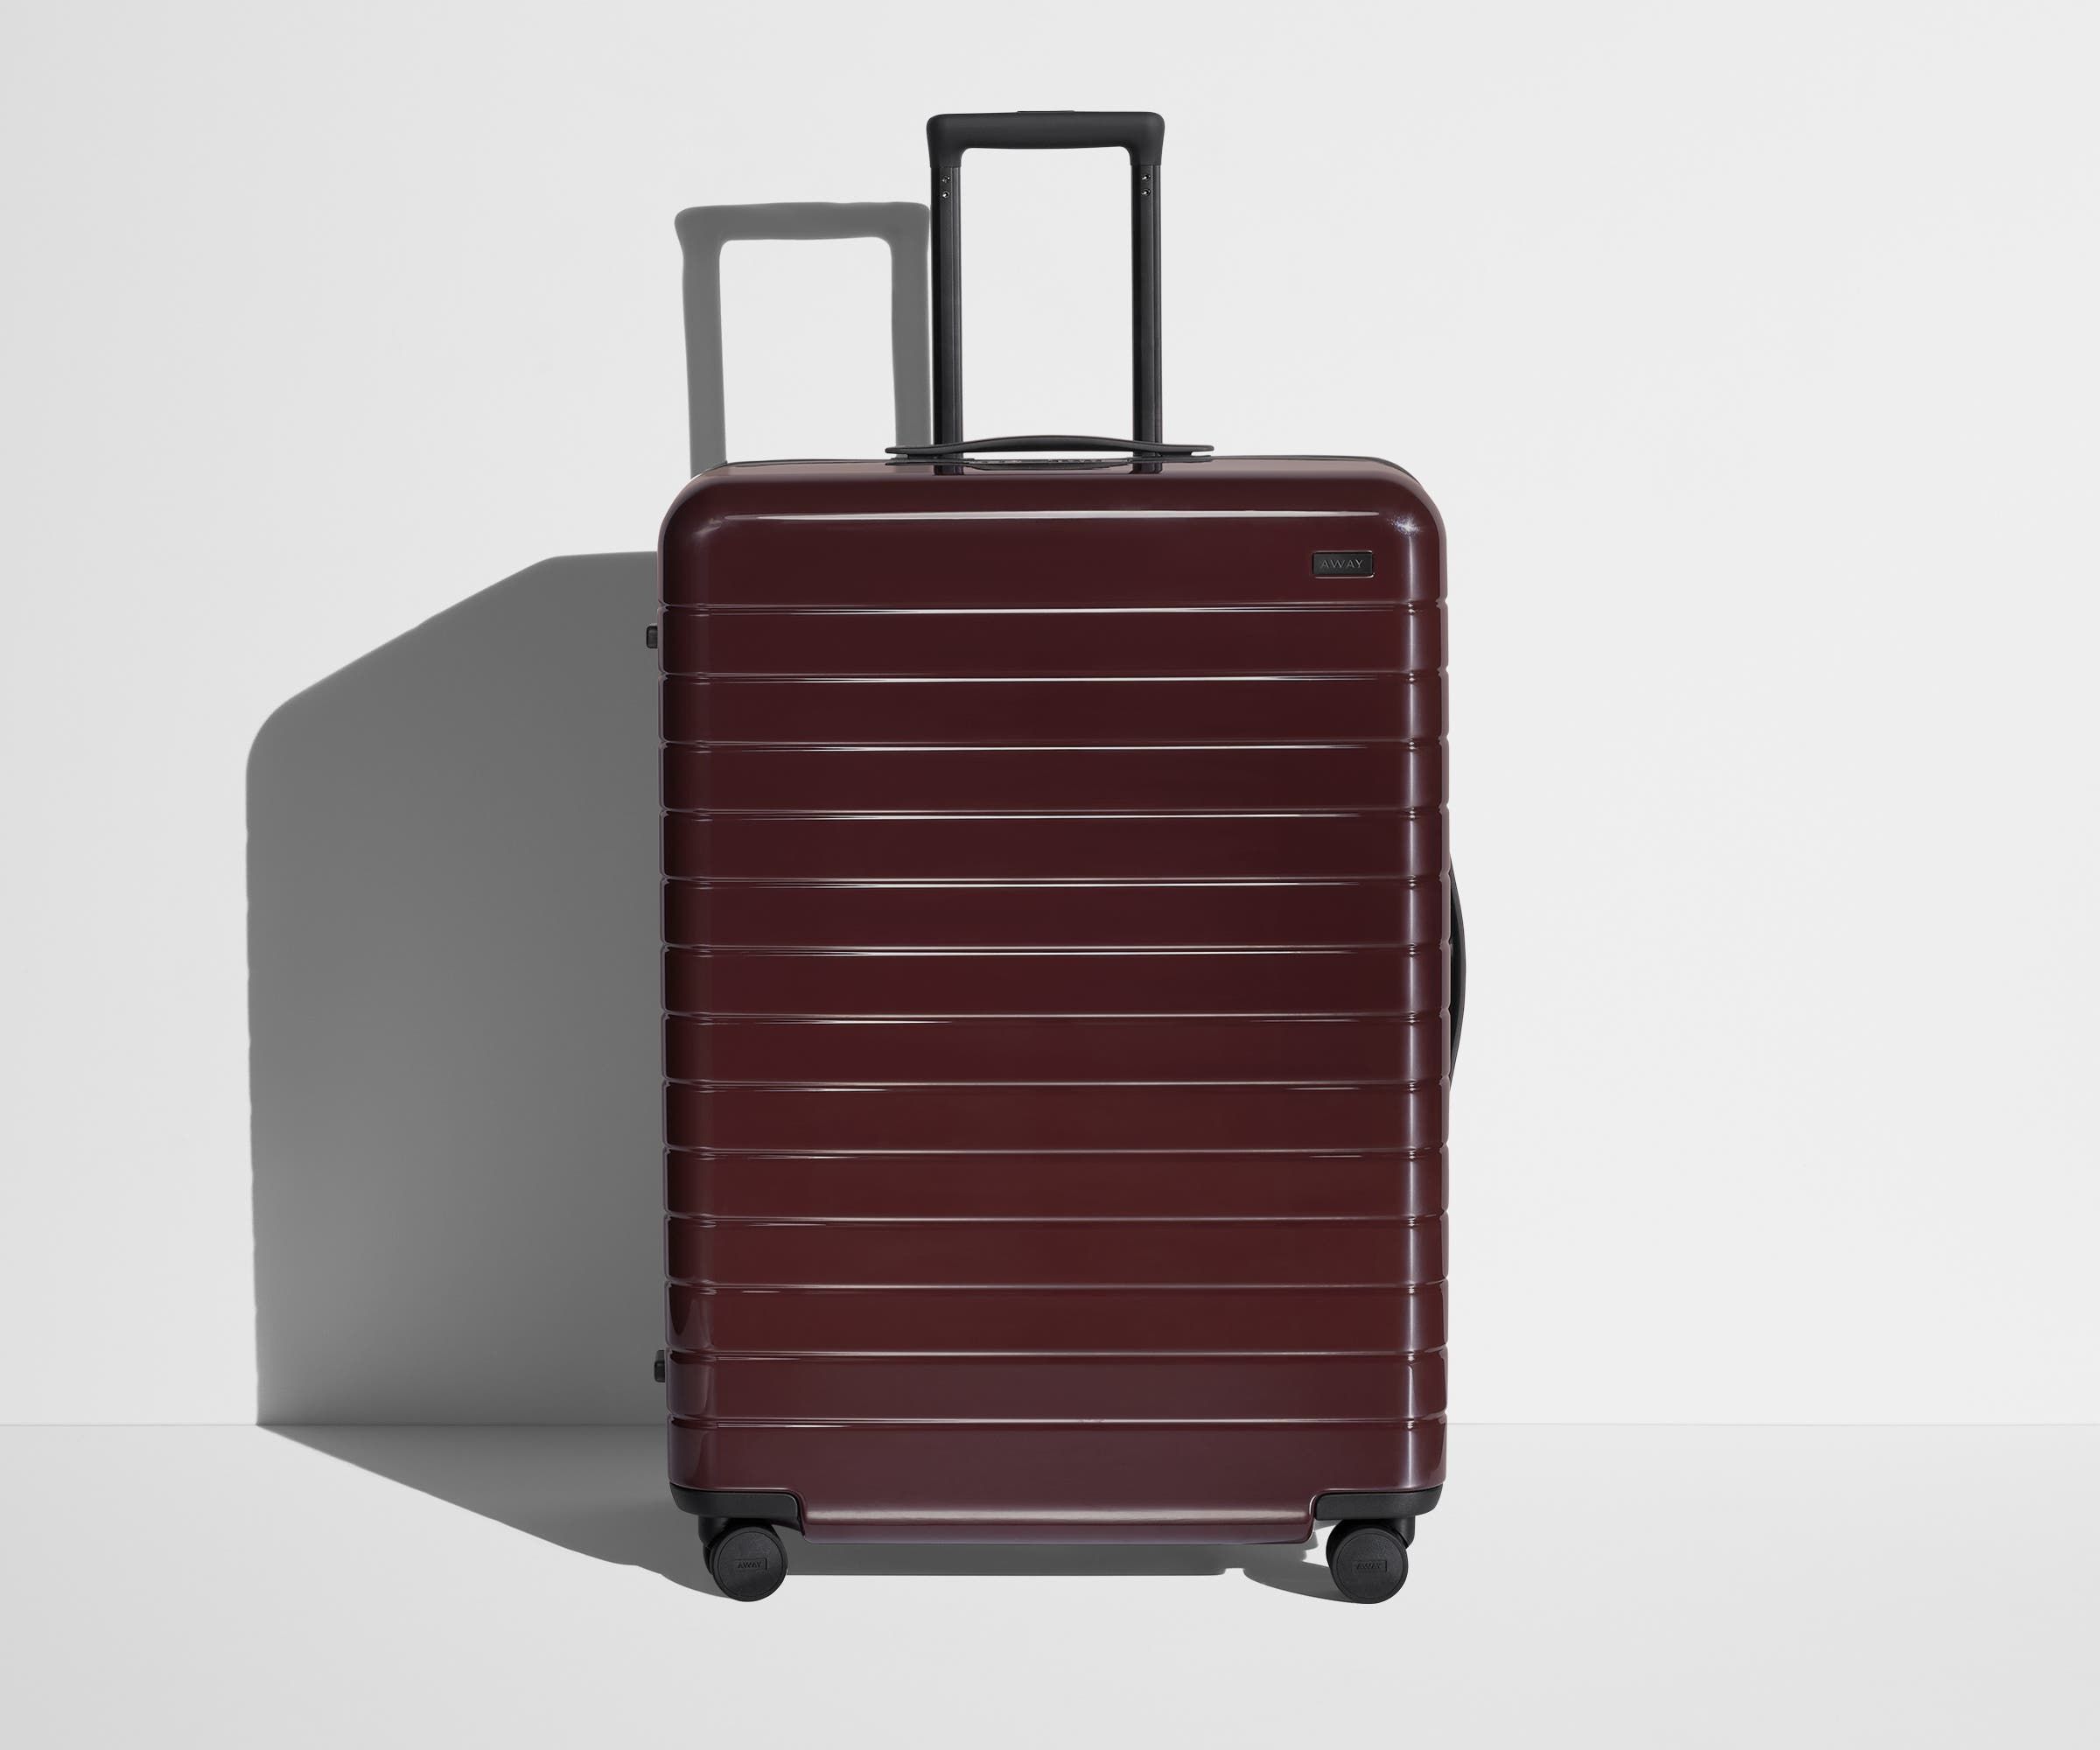 <p><strong>$395.00</strong></p><p><a href="https://go.redirectingat.com?id=74968X1553576&url=https%3A%2F%2Fwww.awaytravel.com%2Fsuitcases%2Flarge%3Fcolor%3Dgarnet_red_gloss&sref=https%3A%2F%2Fwww.harpersbazaar.com%2Ffashion%2Ftrends%2Fg40911125%2Fbest-anniversary-gifts%2F">Shop Now</a></p><p>Before that big anniversary trip, treat yourselves to a shiny, new set of luggage. There's no way you'll miss this limited edition color on the baggage carousel.</p>